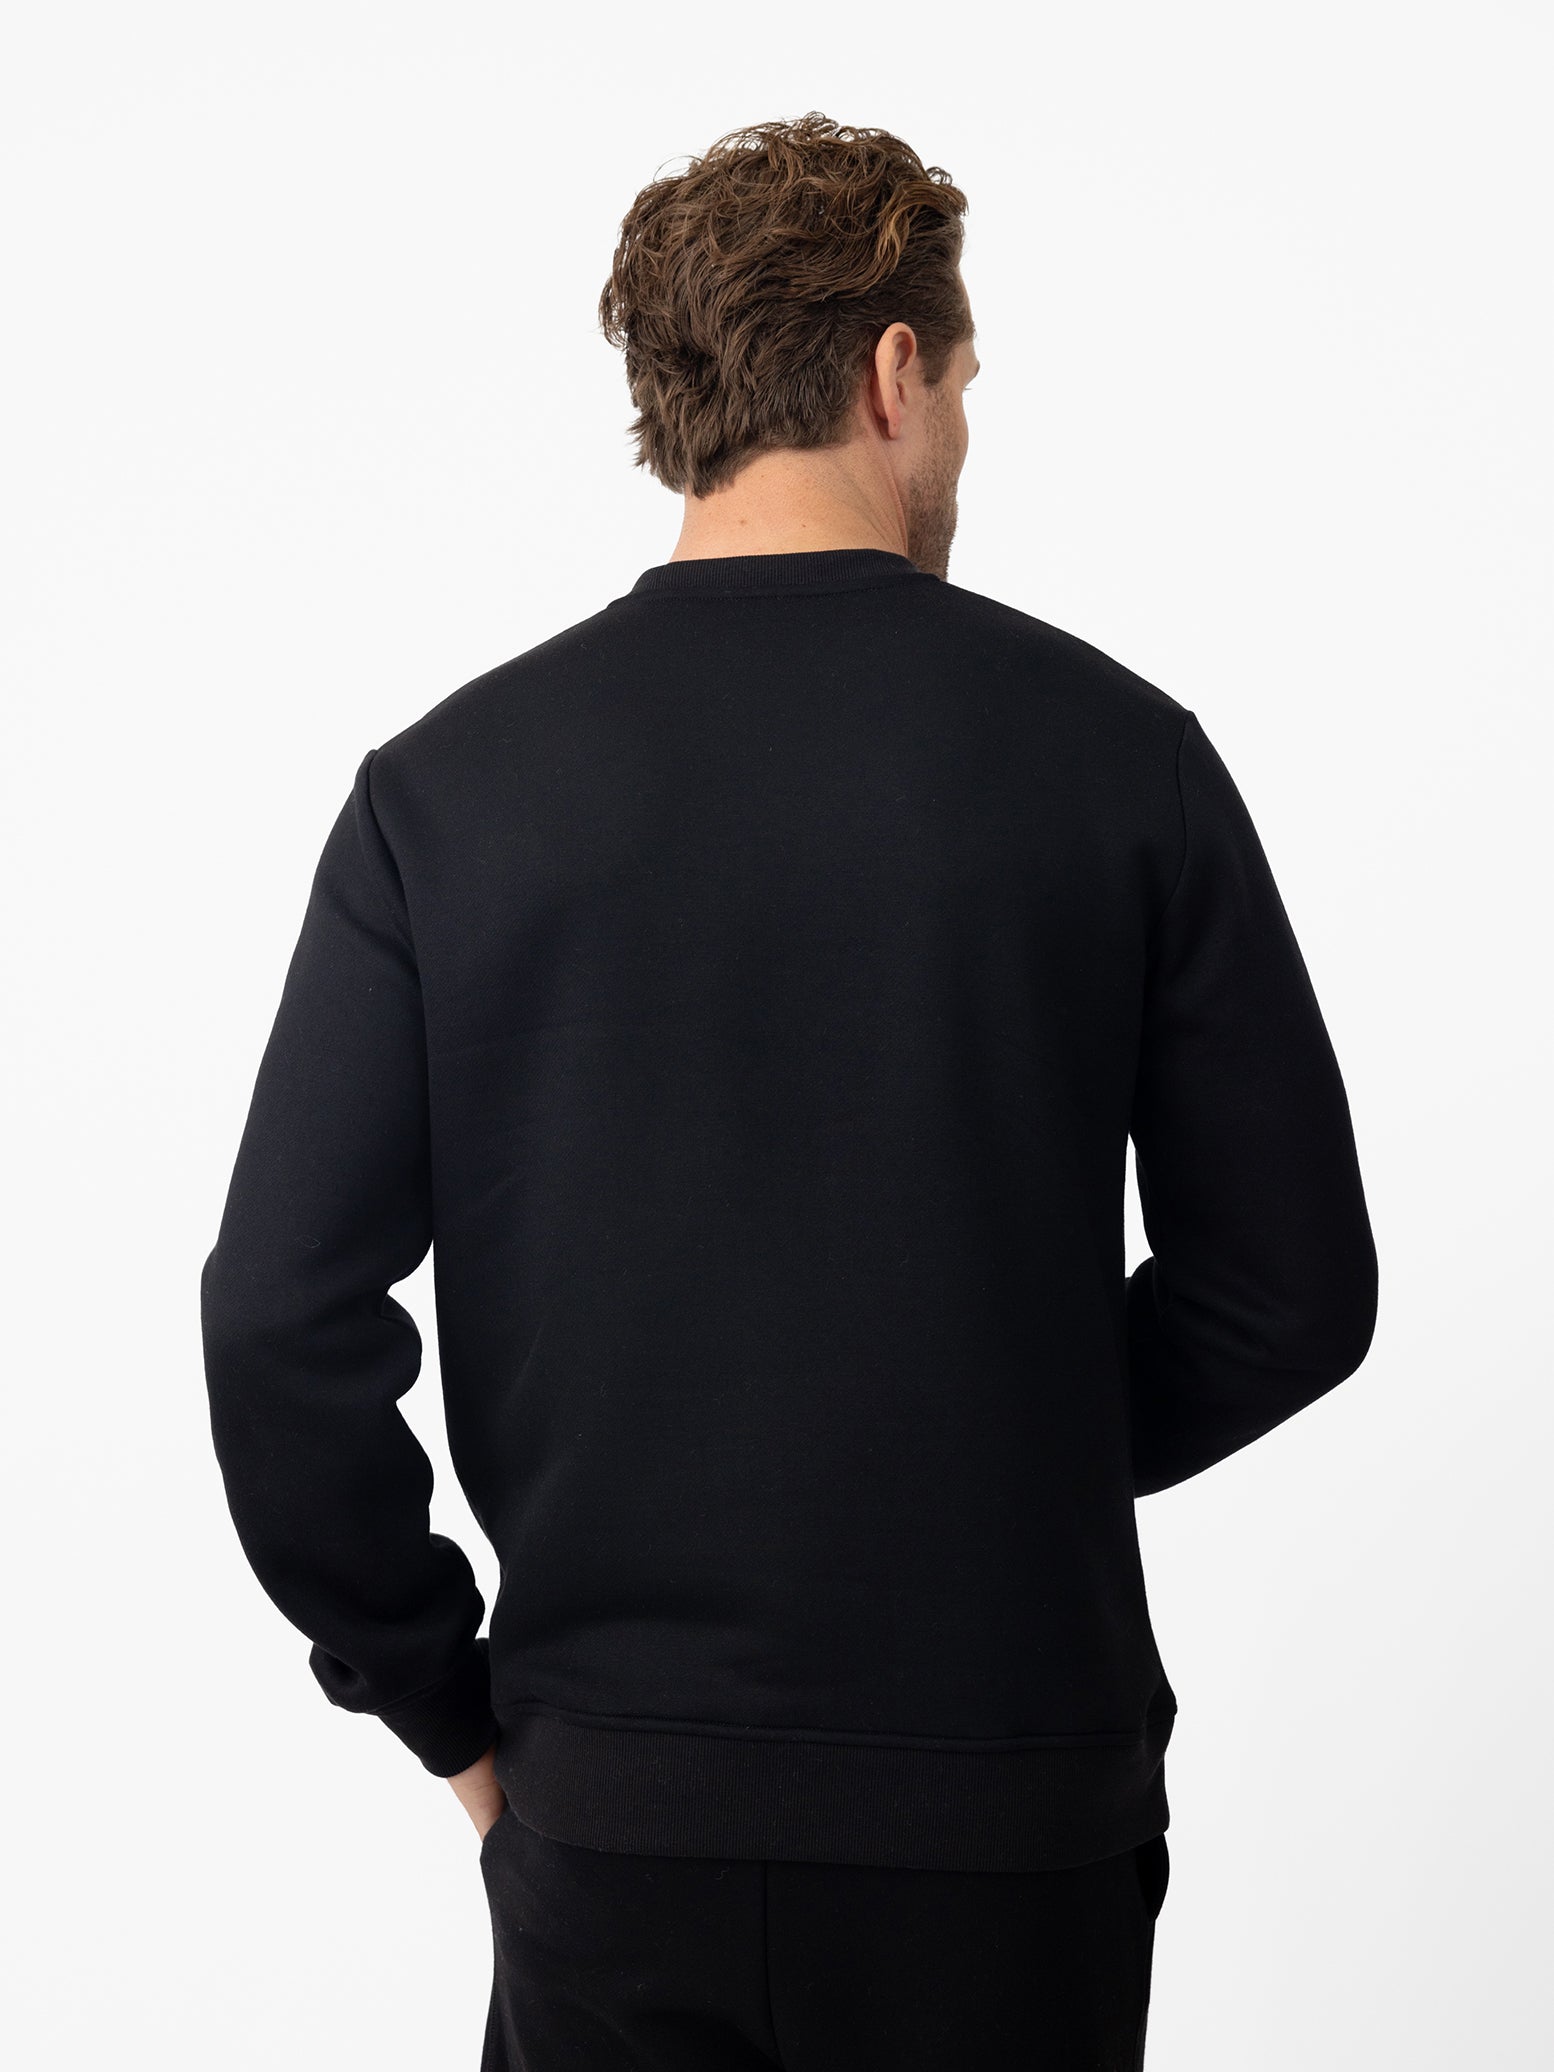 Back of man wearing black cityscape pullover with white background 